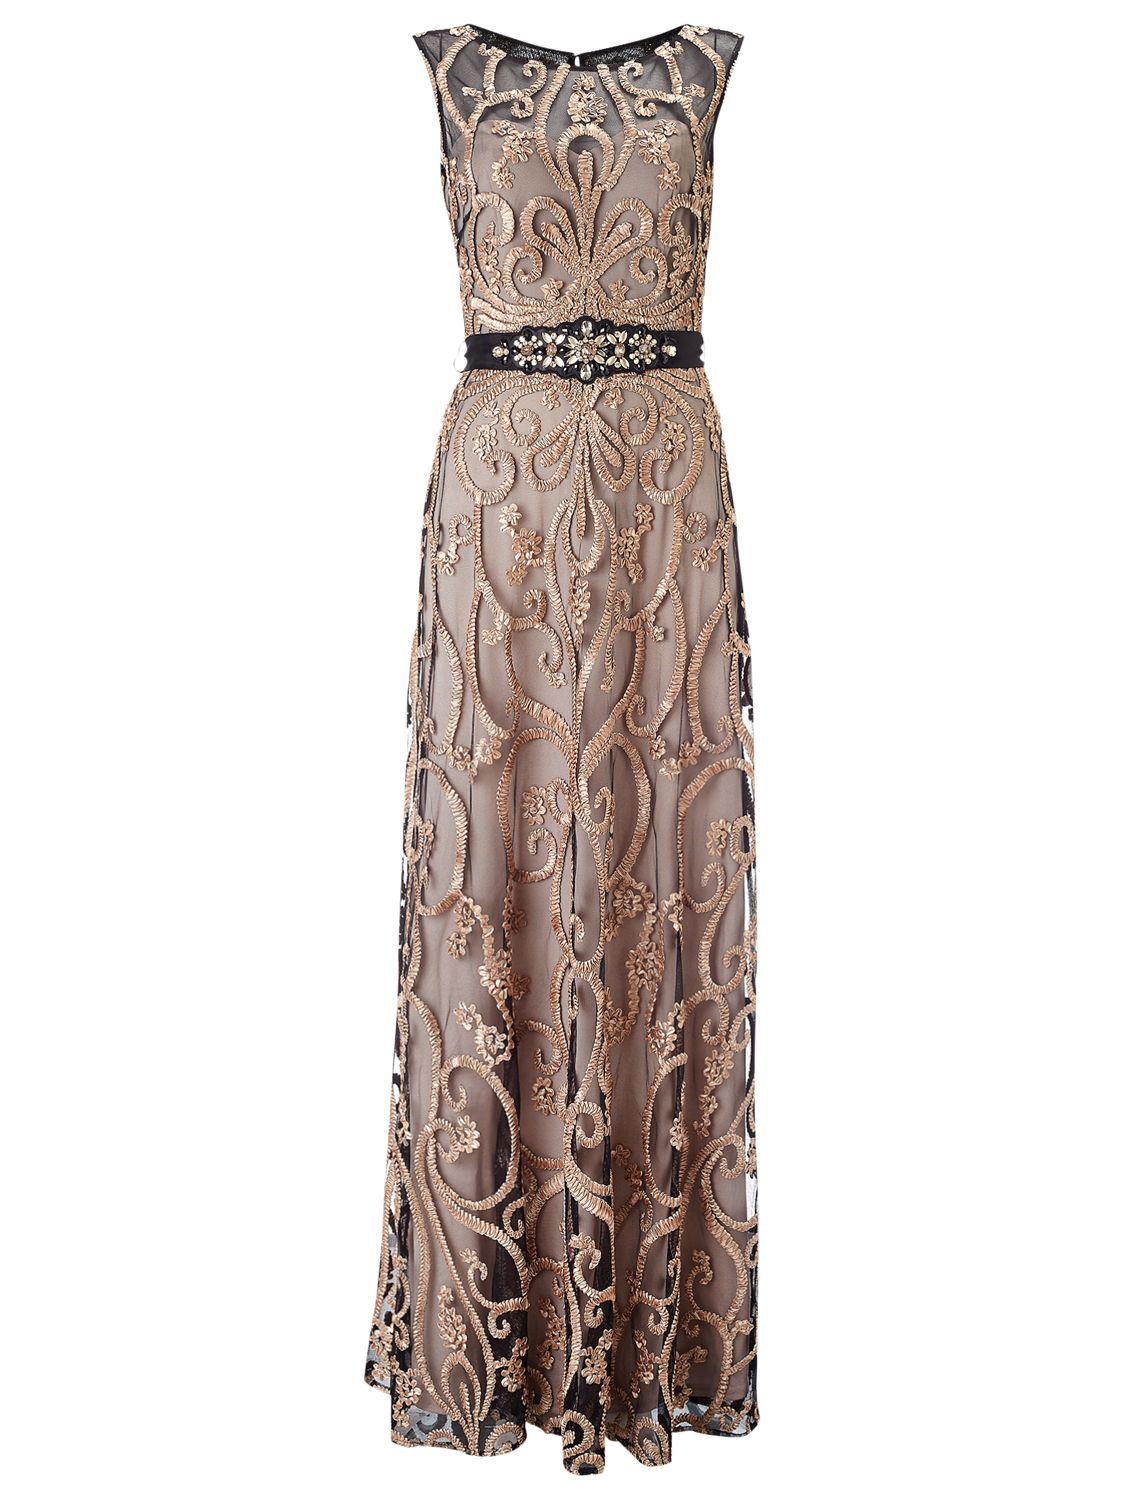 phase eight black and gold dress